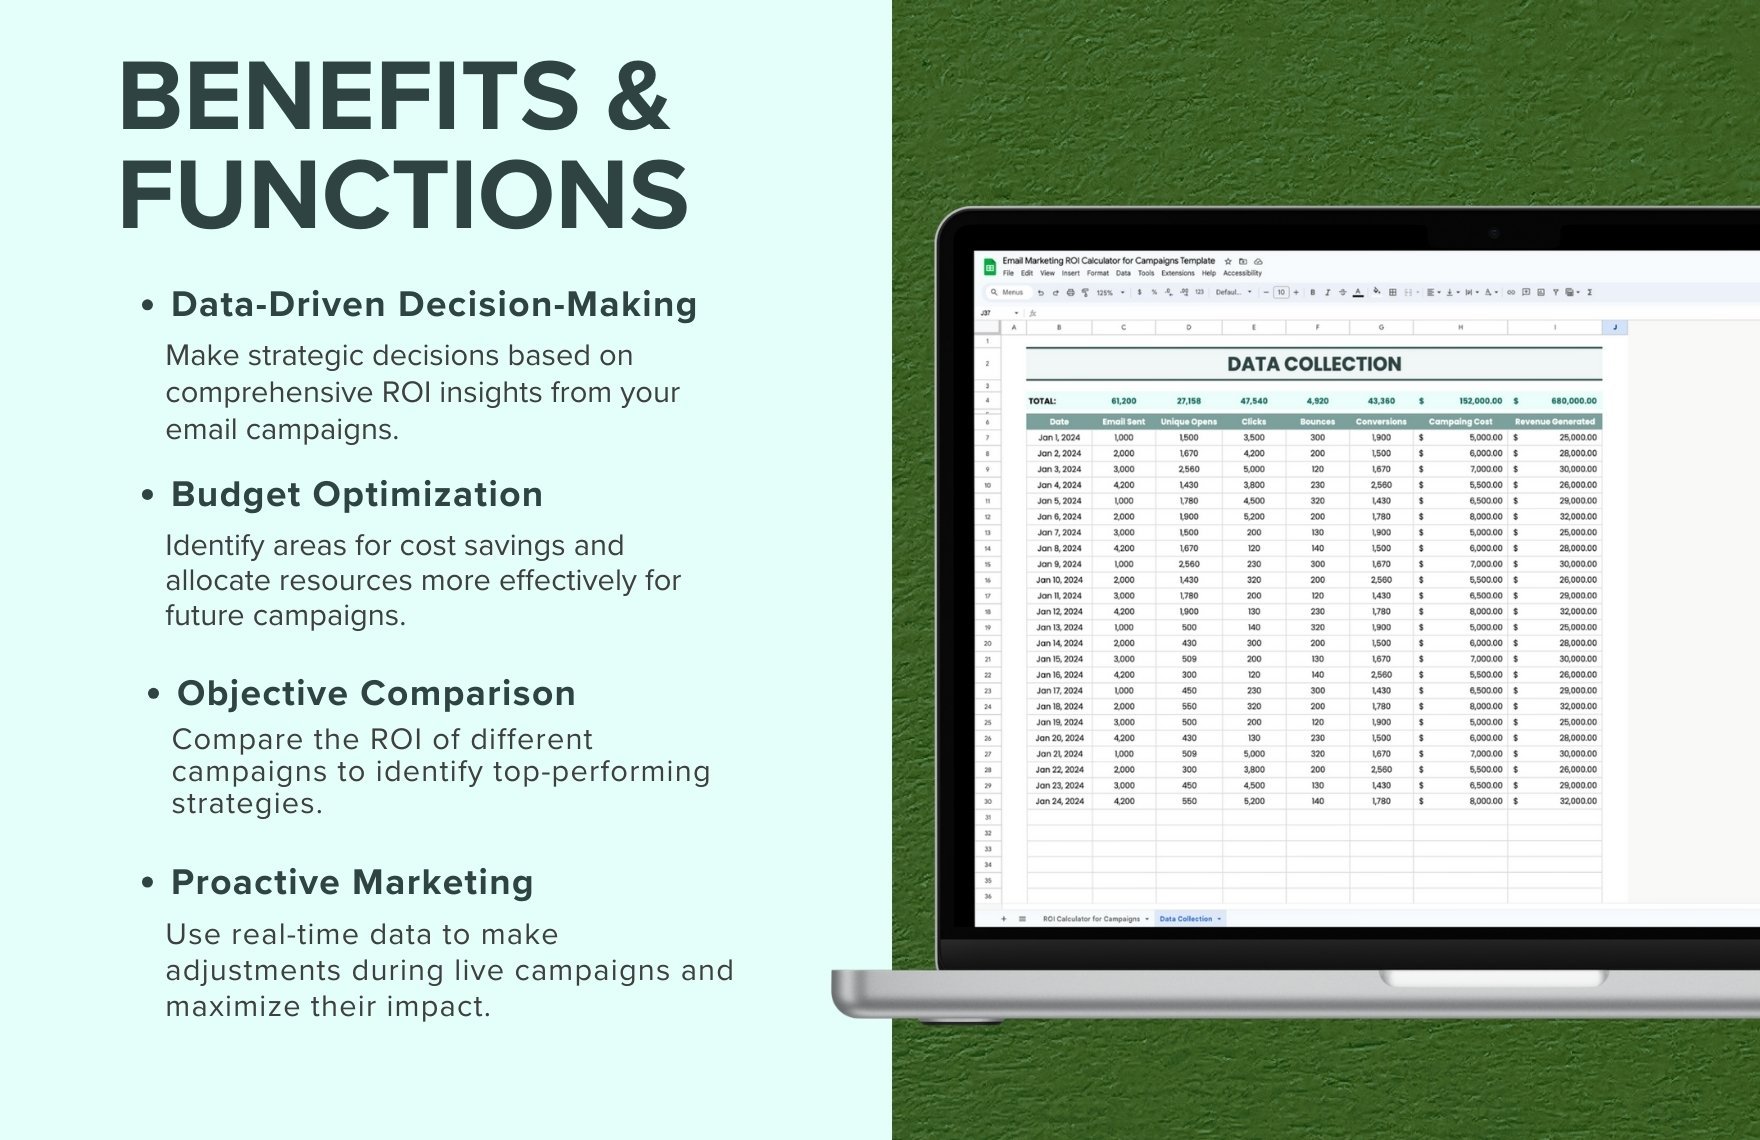 Email Marketing ROI Calculator for Campaigns Template